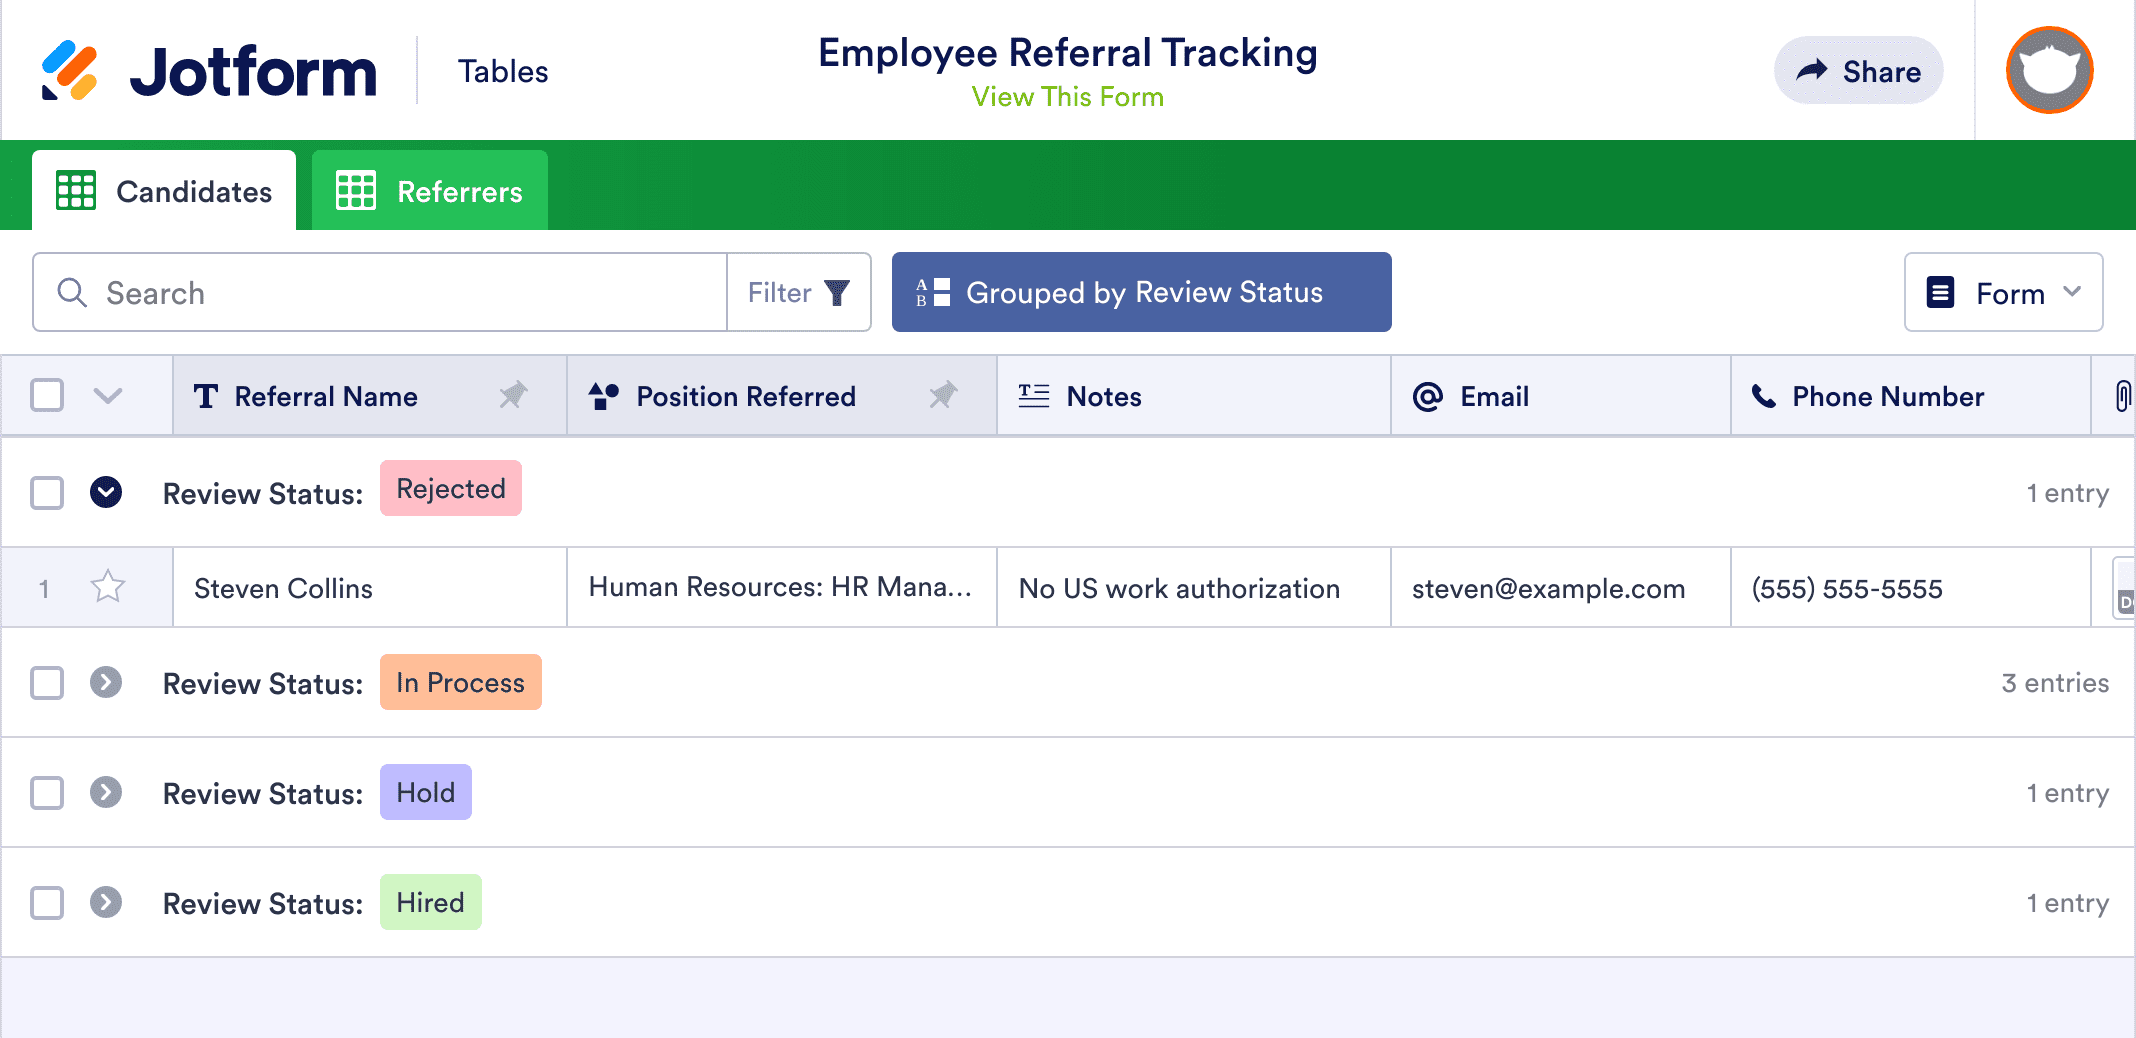 Employee Referral Tracking